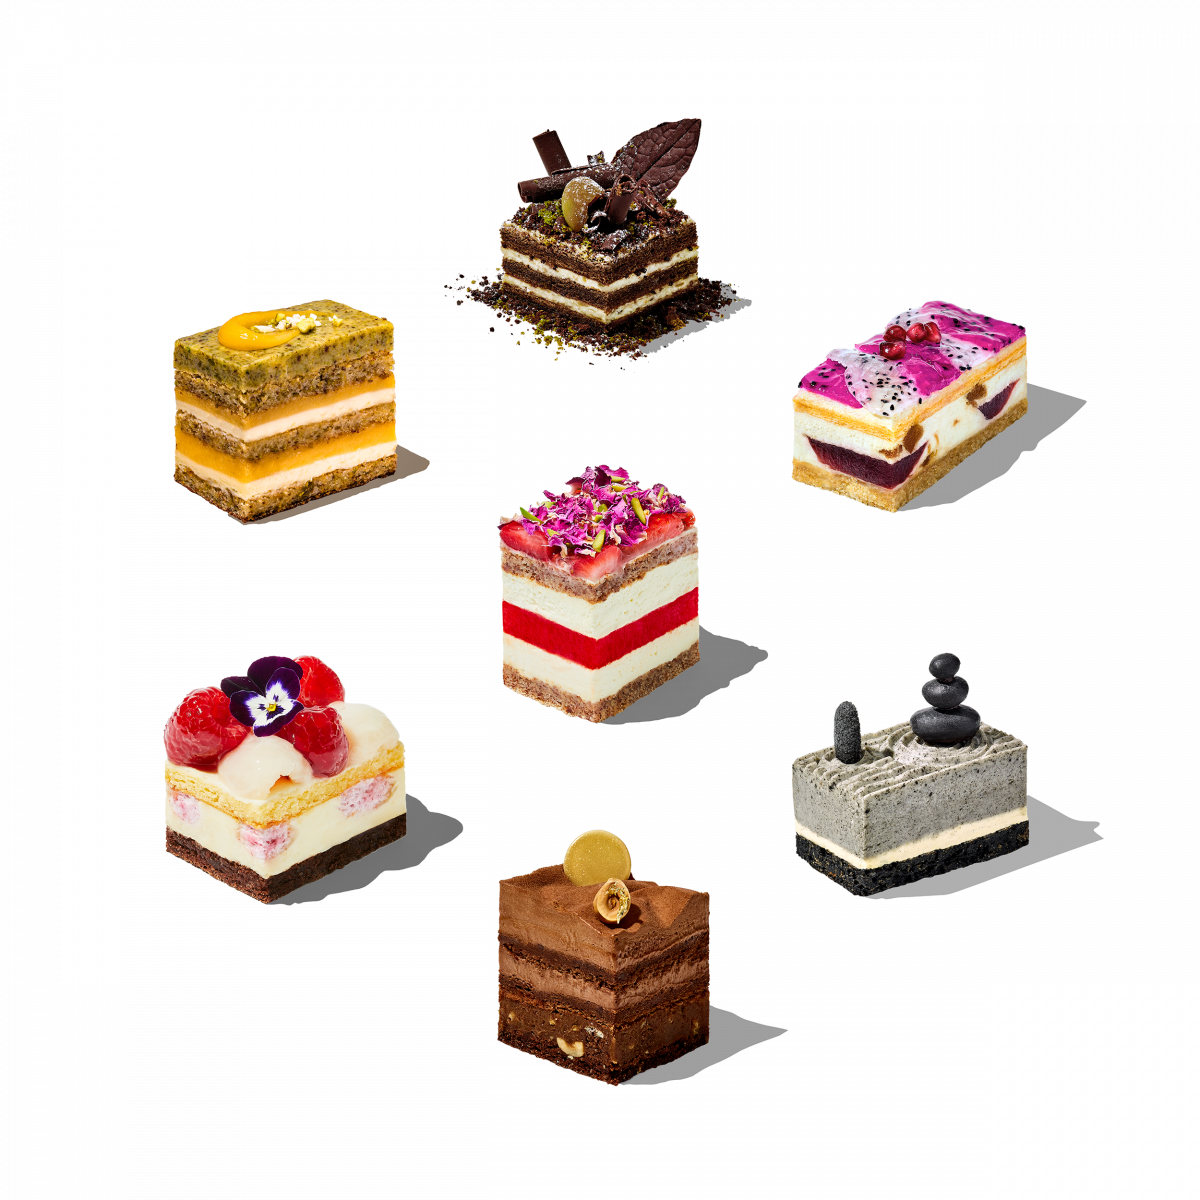 Black Forest Pastry Pastry, Pastry Slice, Pastry Cake Well Food